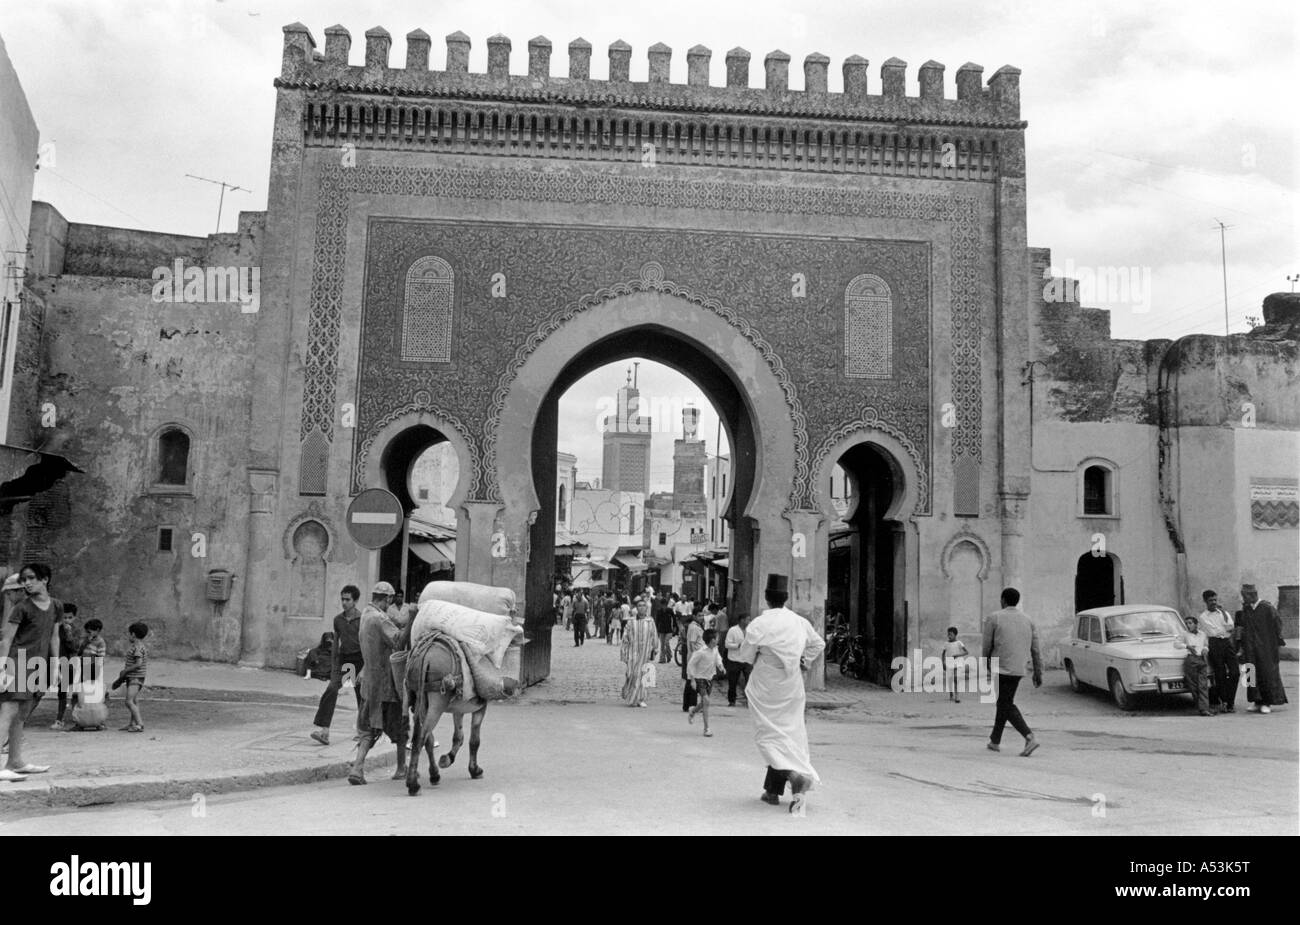 Painet ha1499 303 black and white landscape one main gates old city fes morocco country developing nation less economically Stock Photo